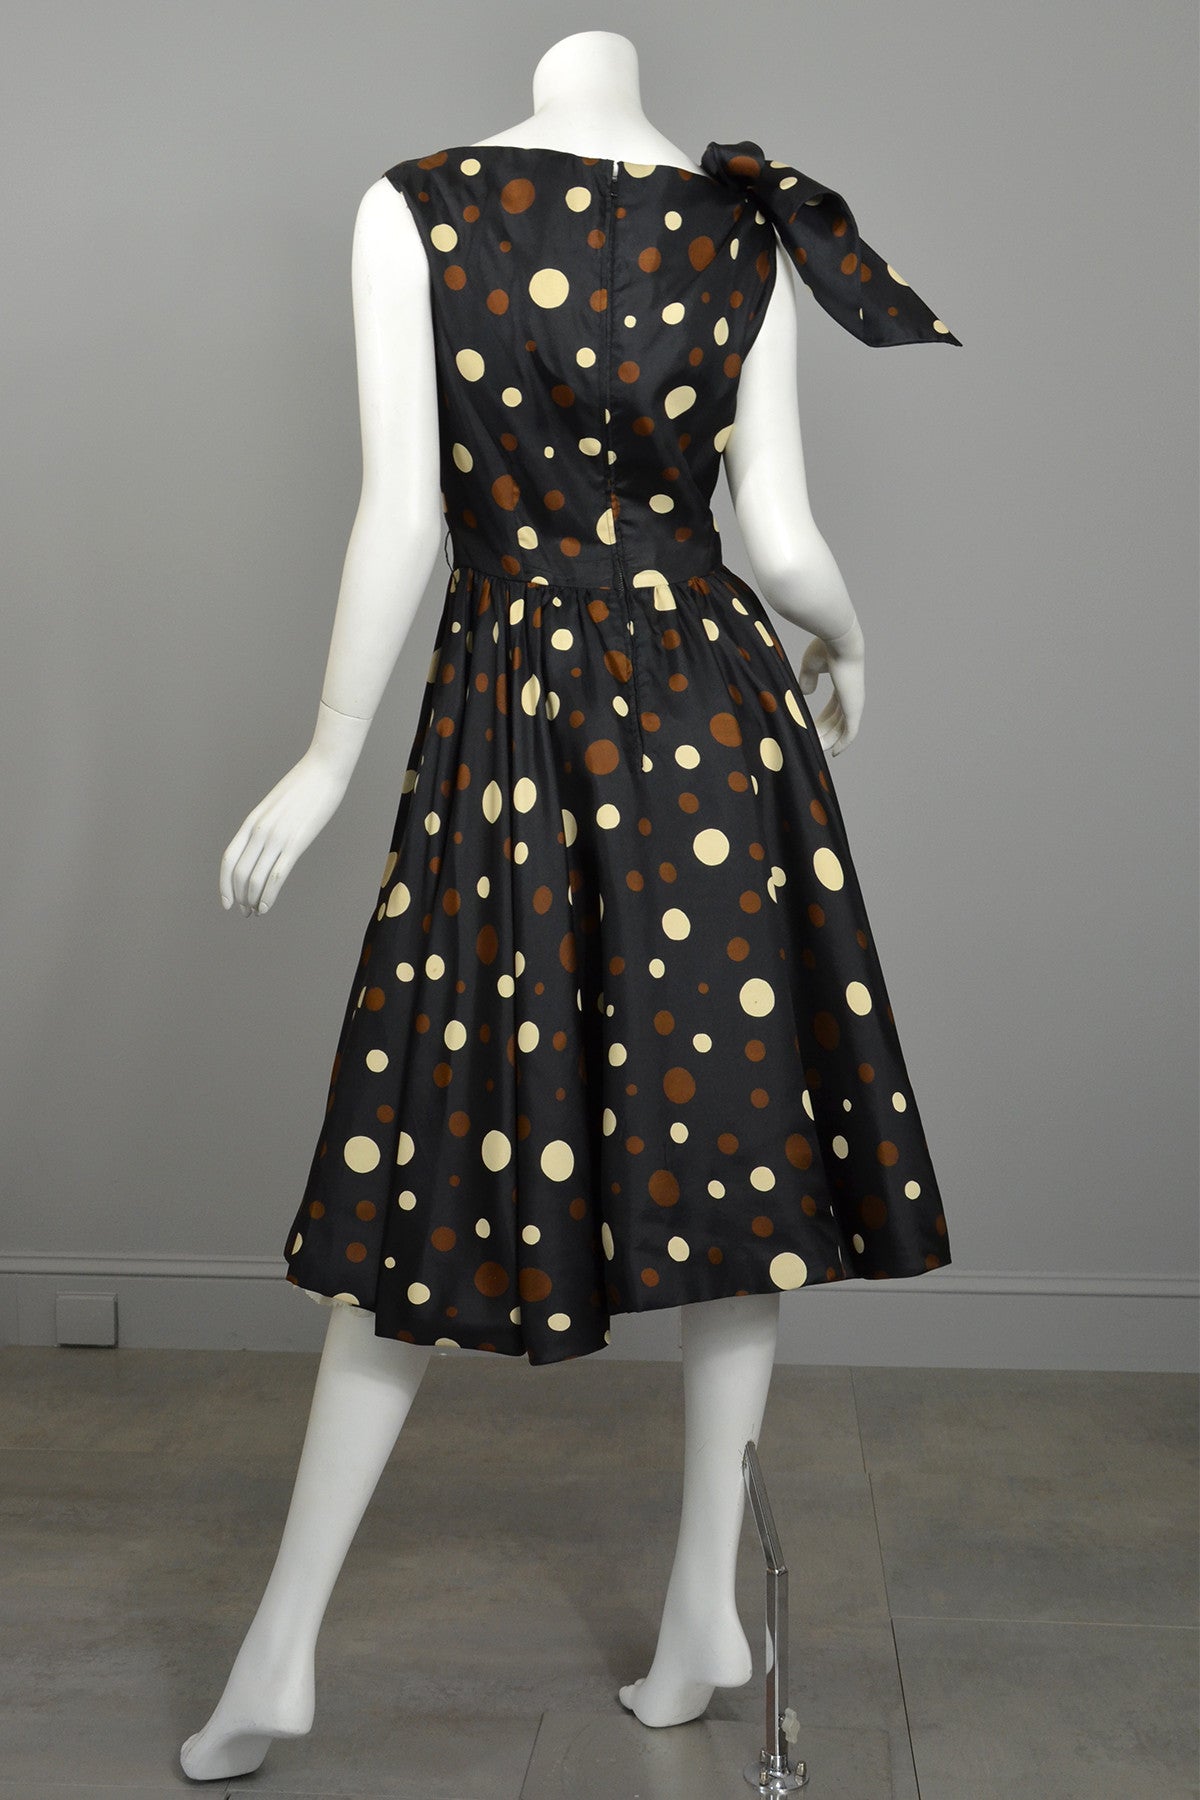 Coming! Vintage 1960s Polka Dot Kitten Bow Fit and Flare Dress